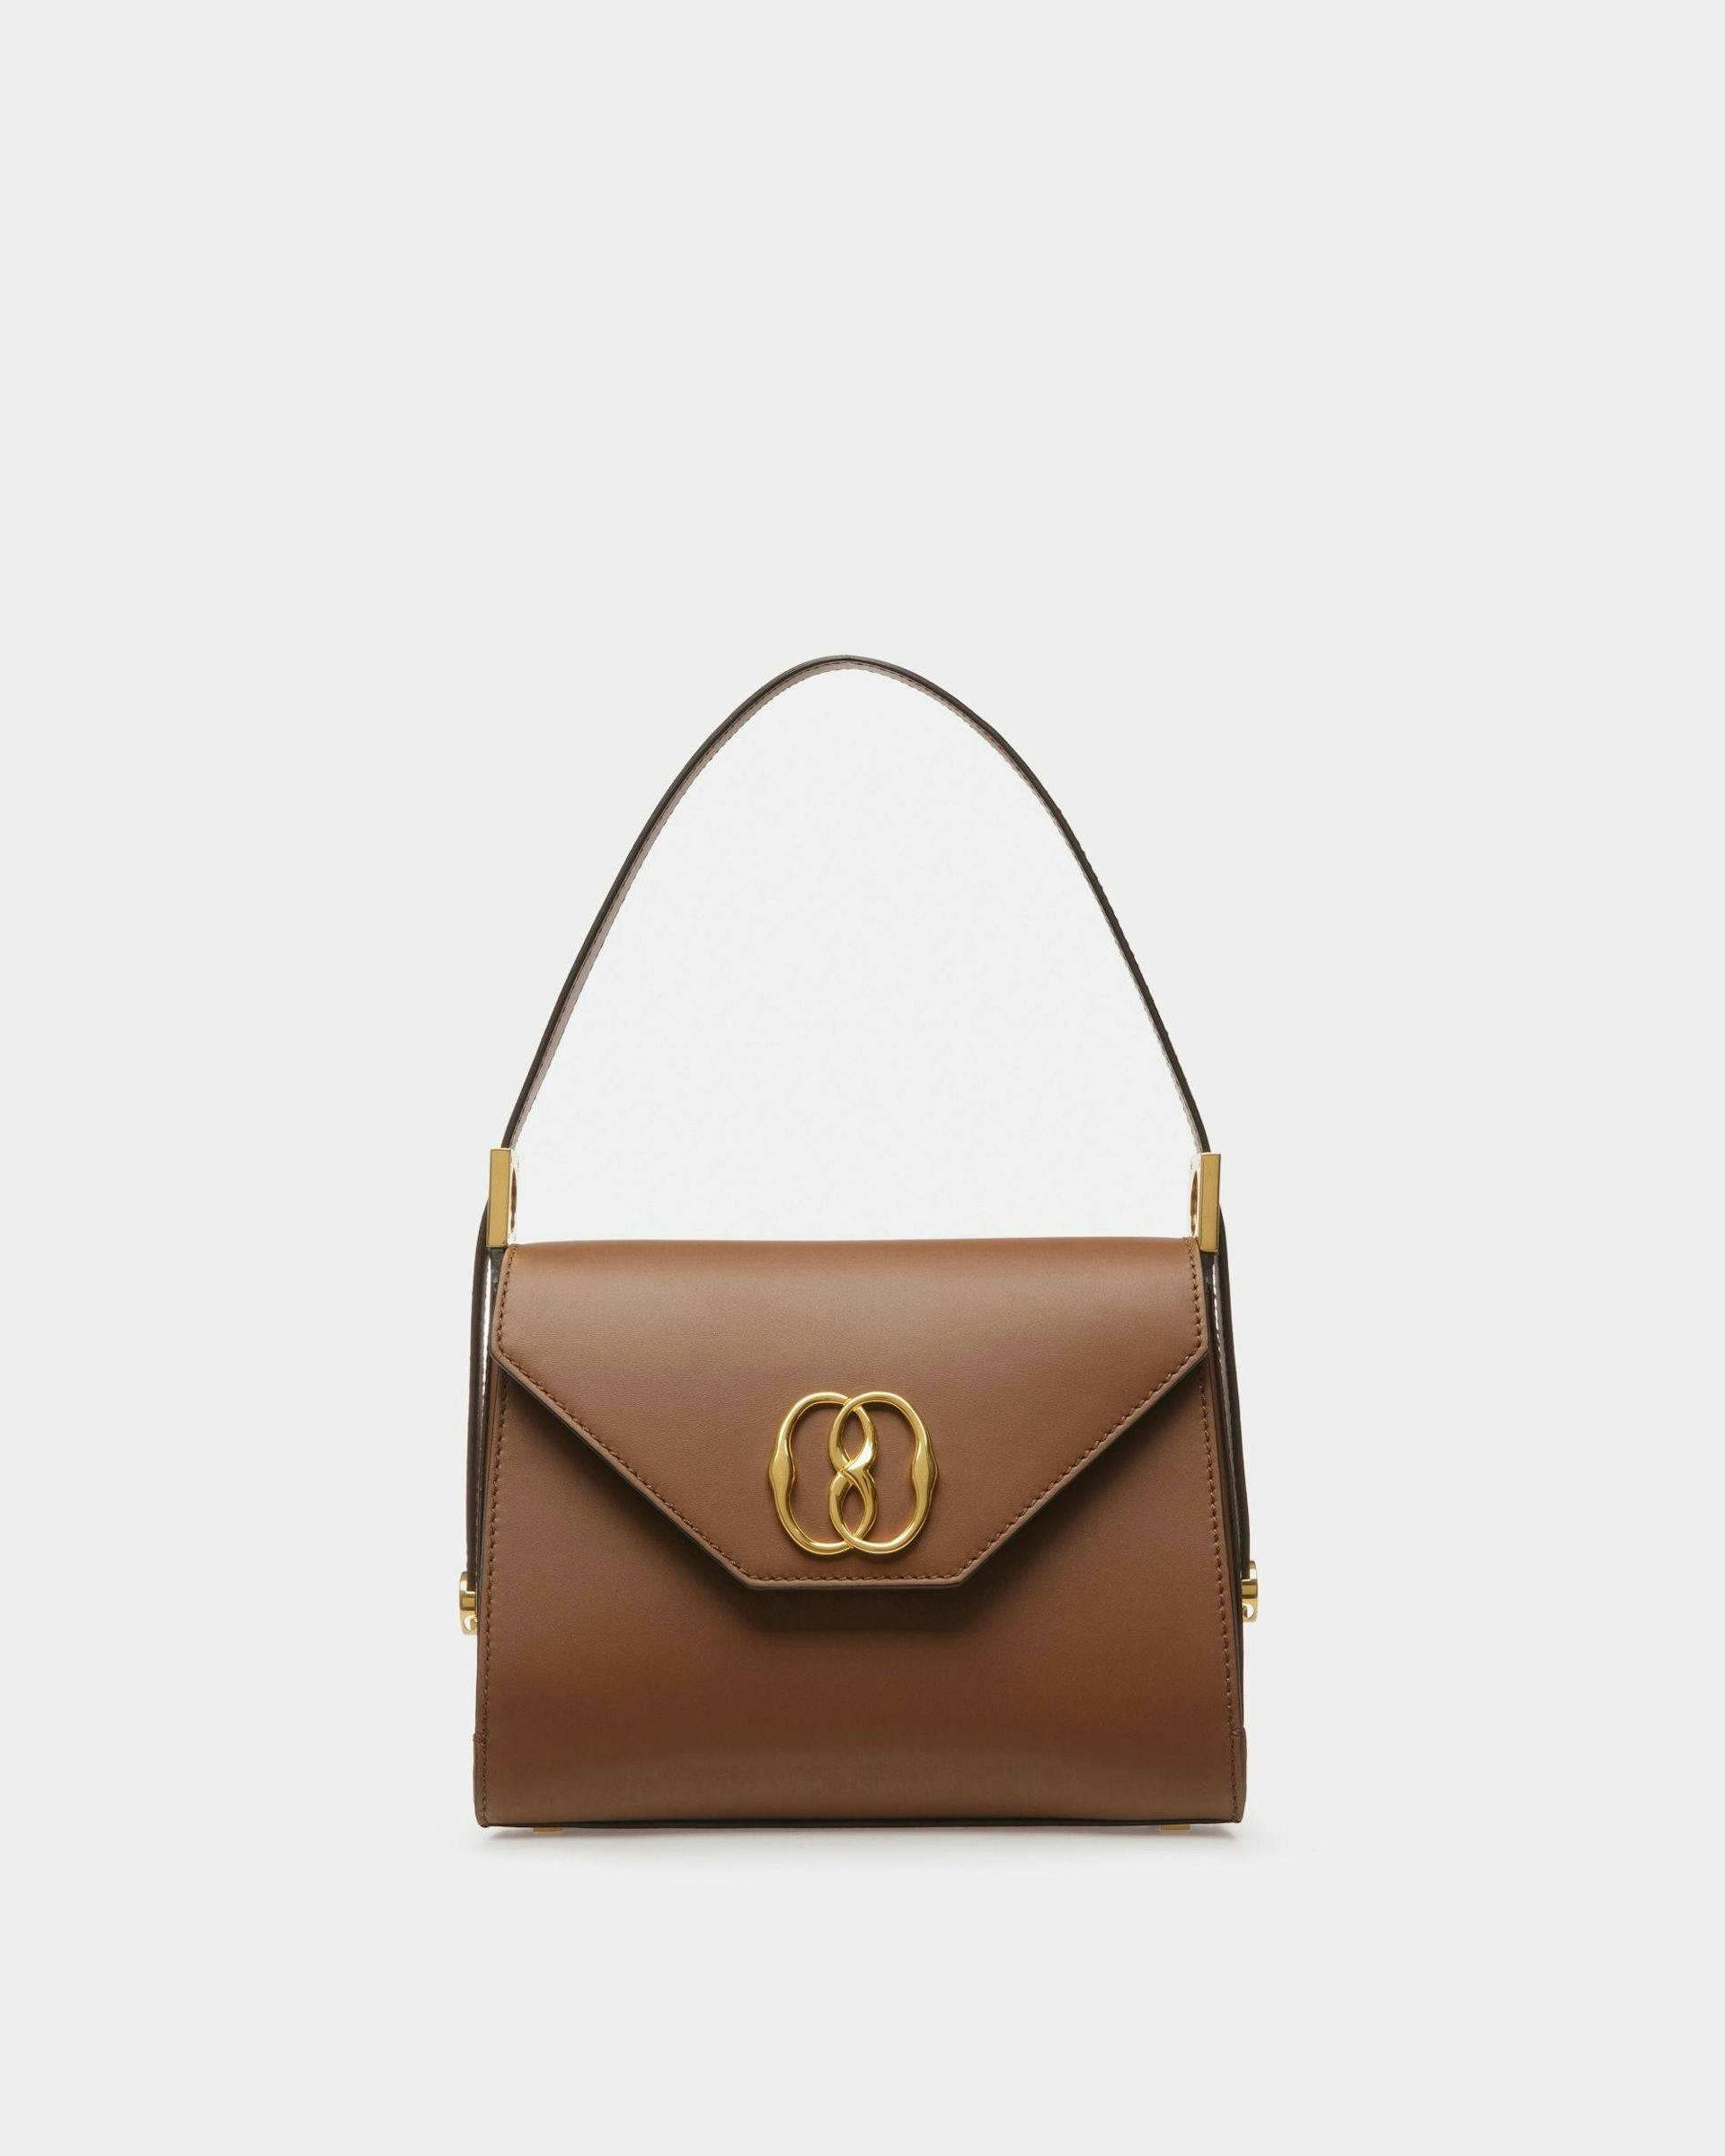 Women's Emblem Top Handle Bag In Brown Leather | Bally | Still Life Front